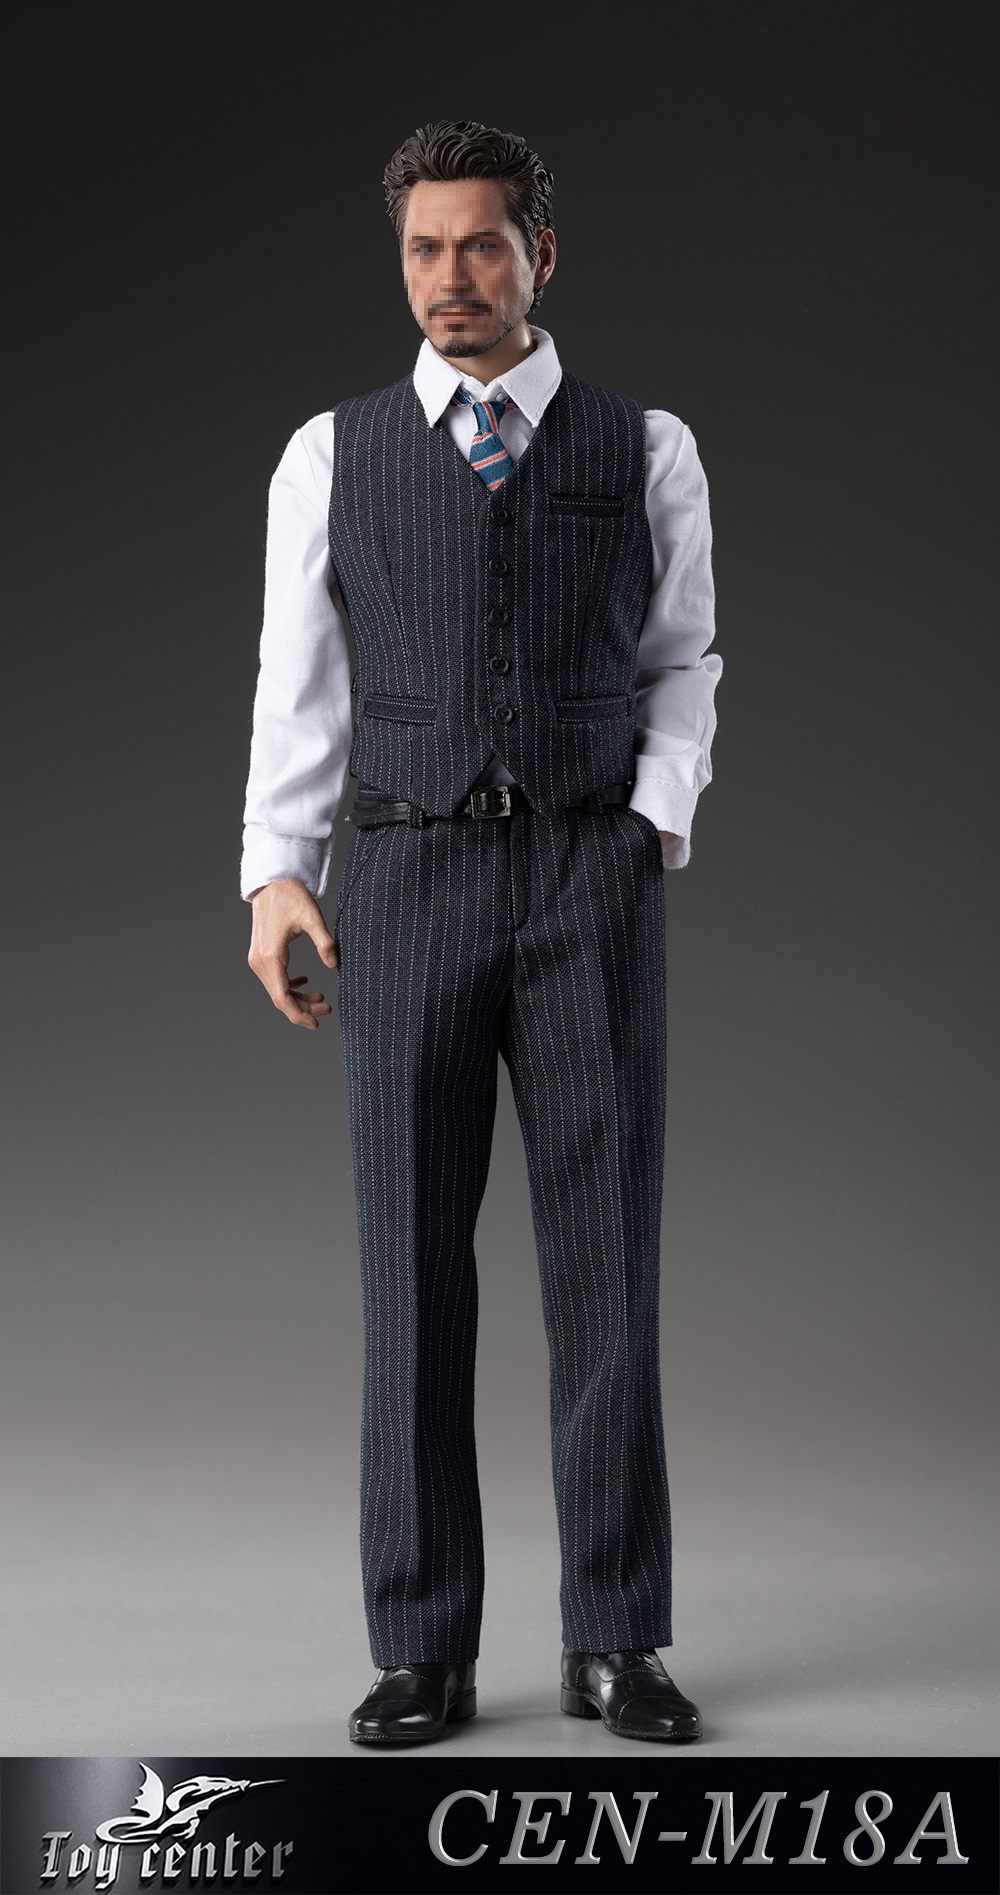 NEW PRODUCT: Toy center: 1/6 British Gentleman Tony Striped Suit CEN-M18 Three Colors 15522212